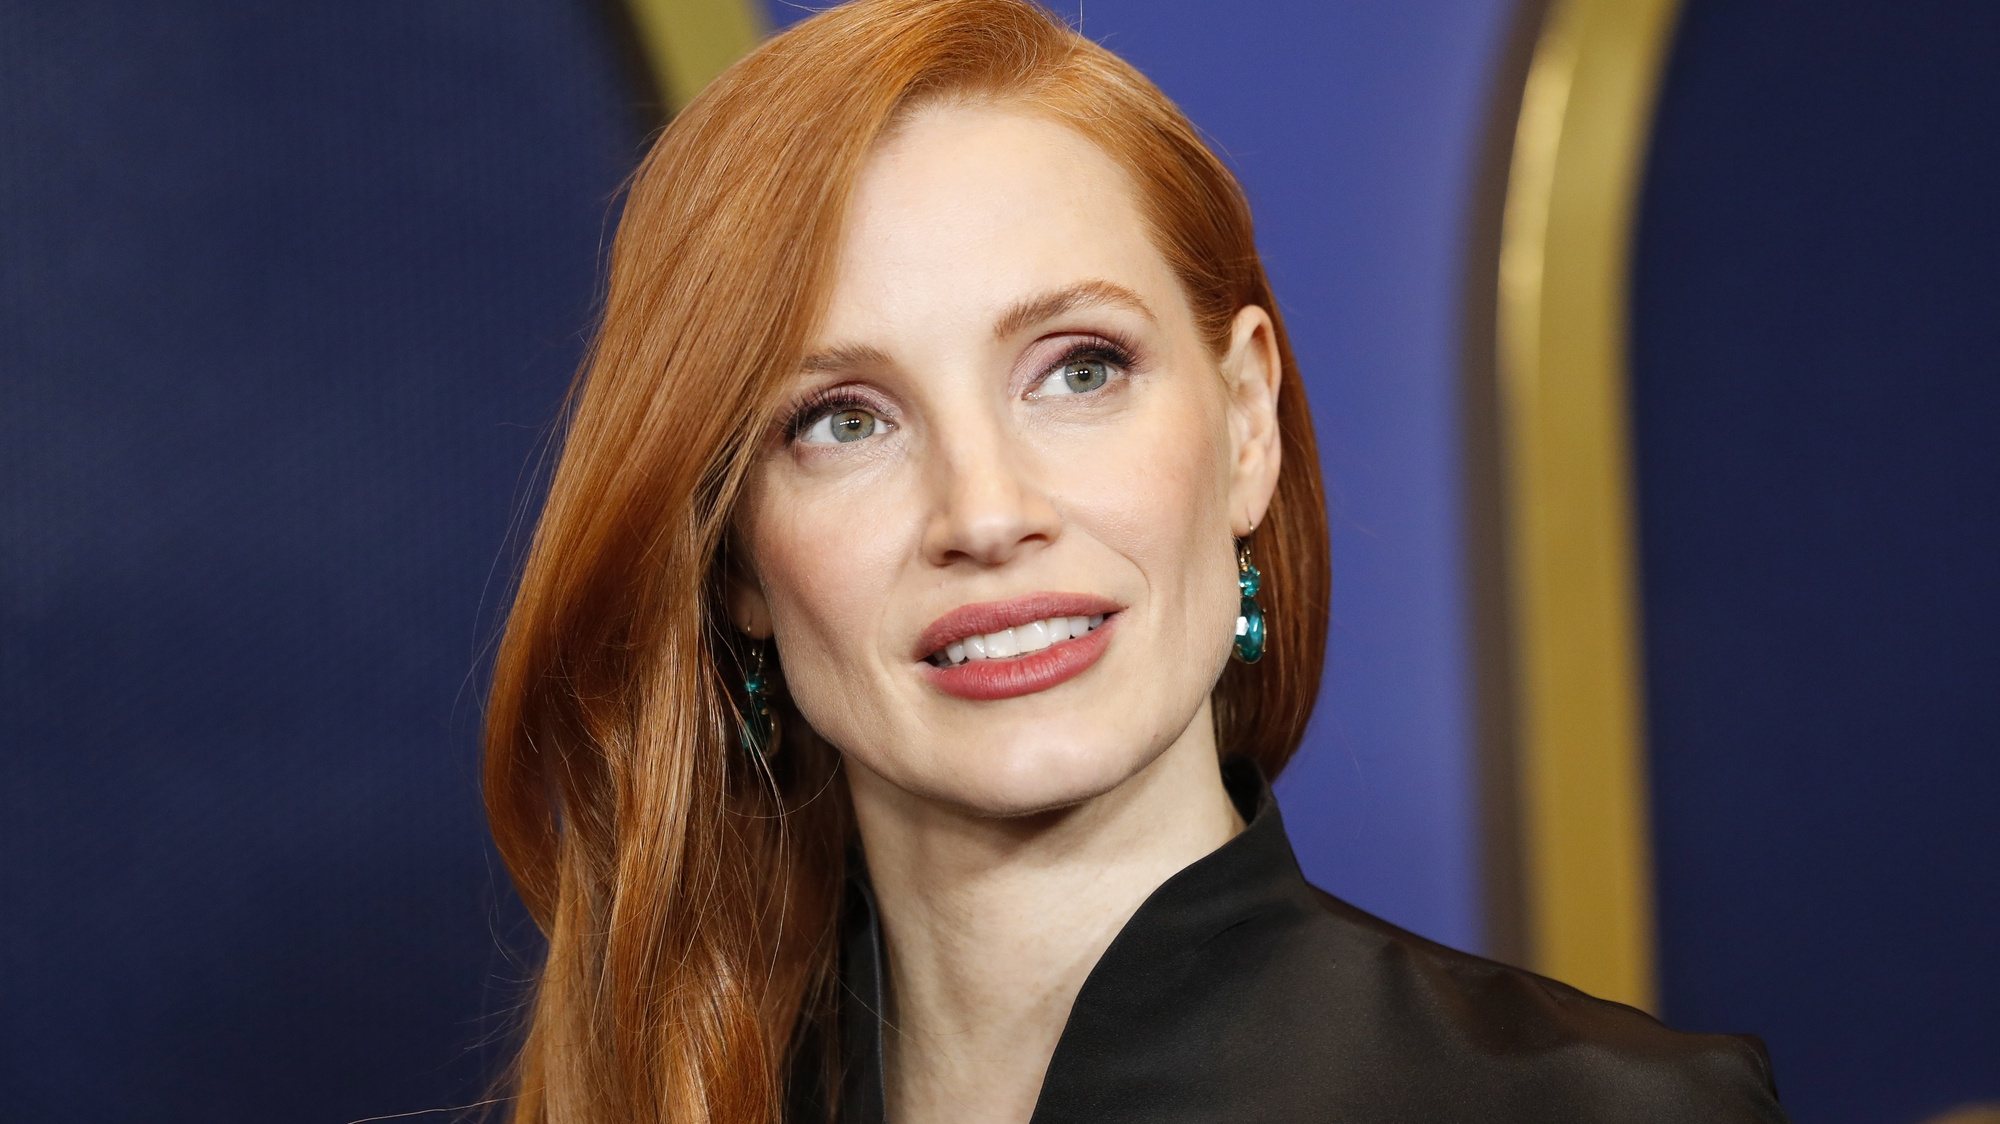 epa09808604 US actress Jessica Chastain arrives for the 94th Oscars Nominees Luncheon at the Fairmont Century Plaza in Los Angeles, California, USA, 07 March 2022. The 94th Academy Awards ceremony will be held on 27 March 2022.  EPA/CAROLINE BREHMAN